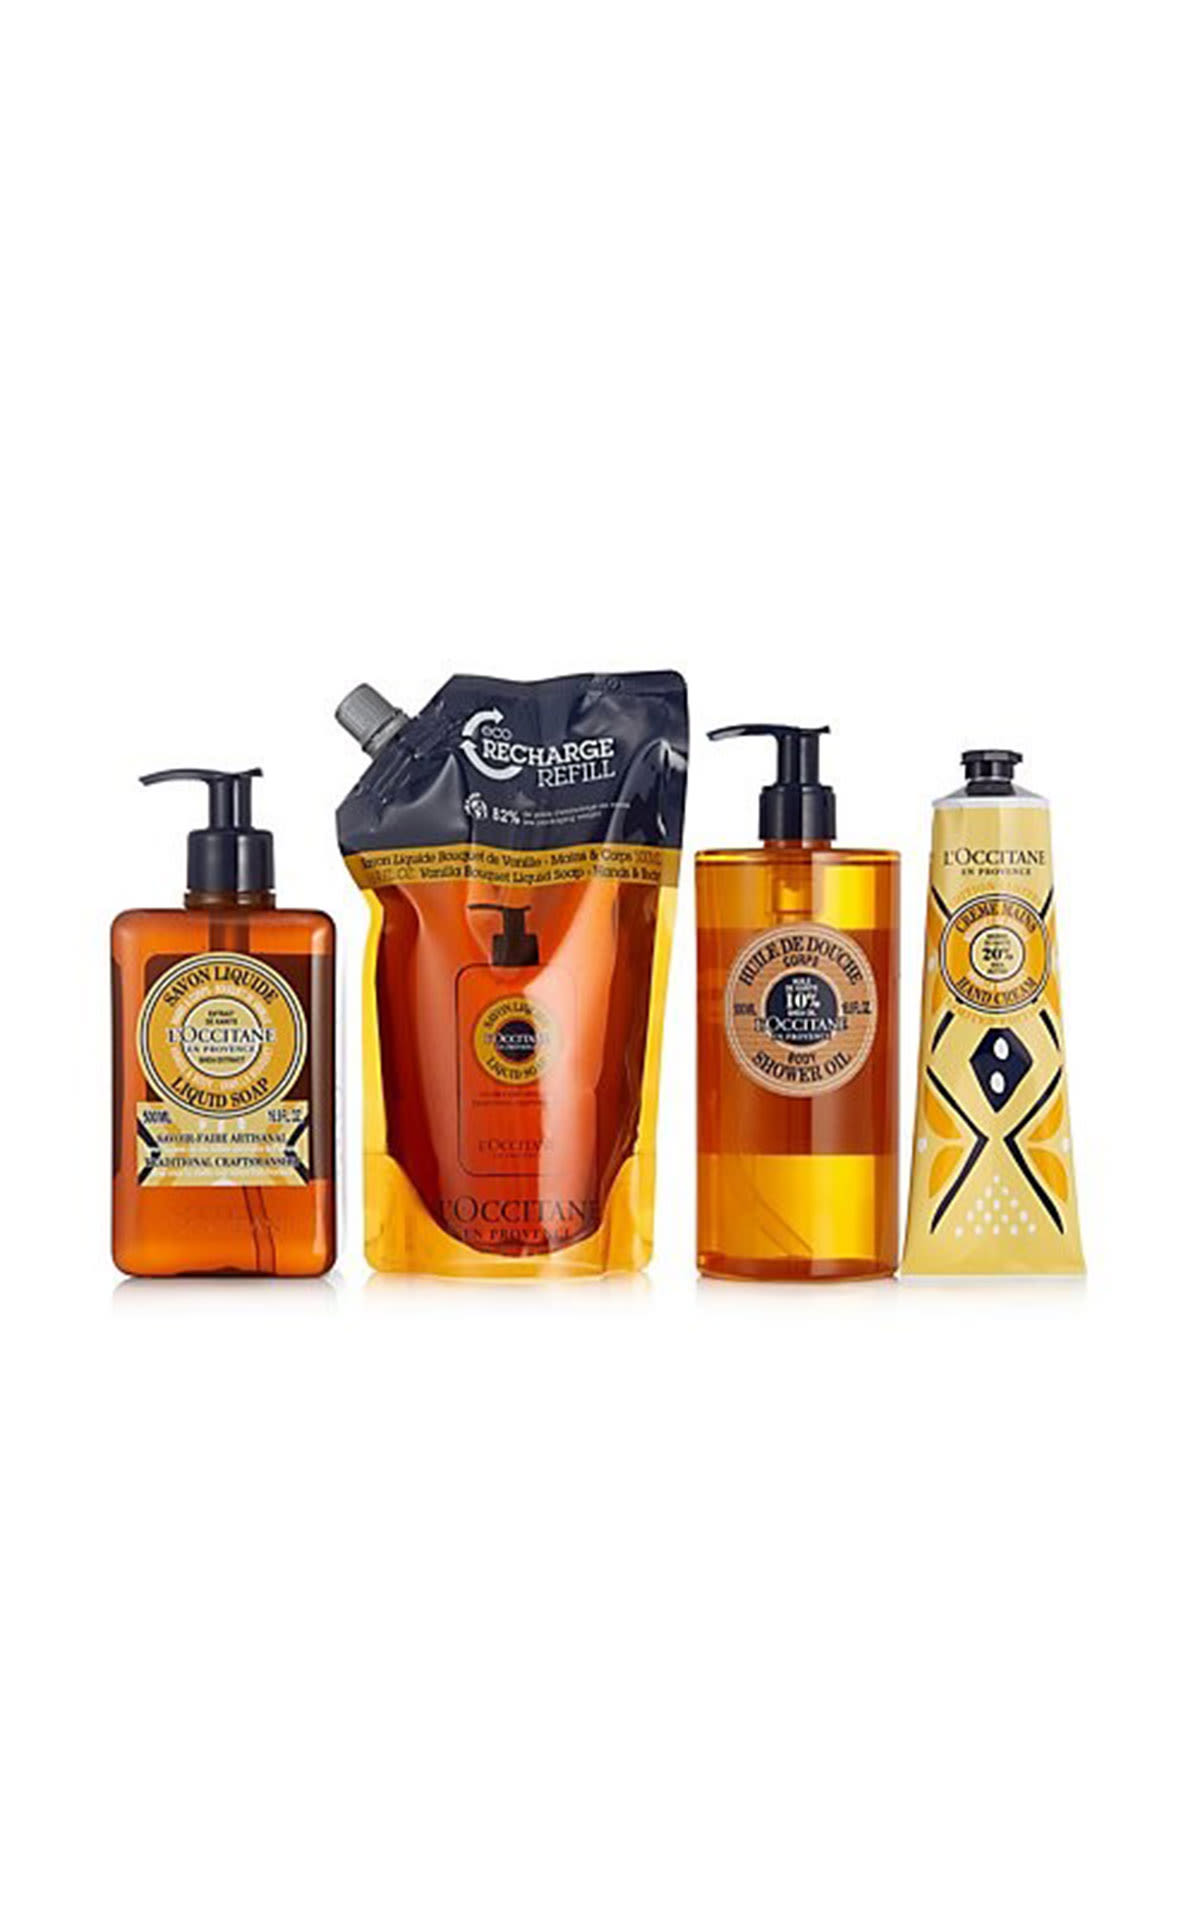 L'Occitane en Provence Vanilla shea collection from Bicester Village